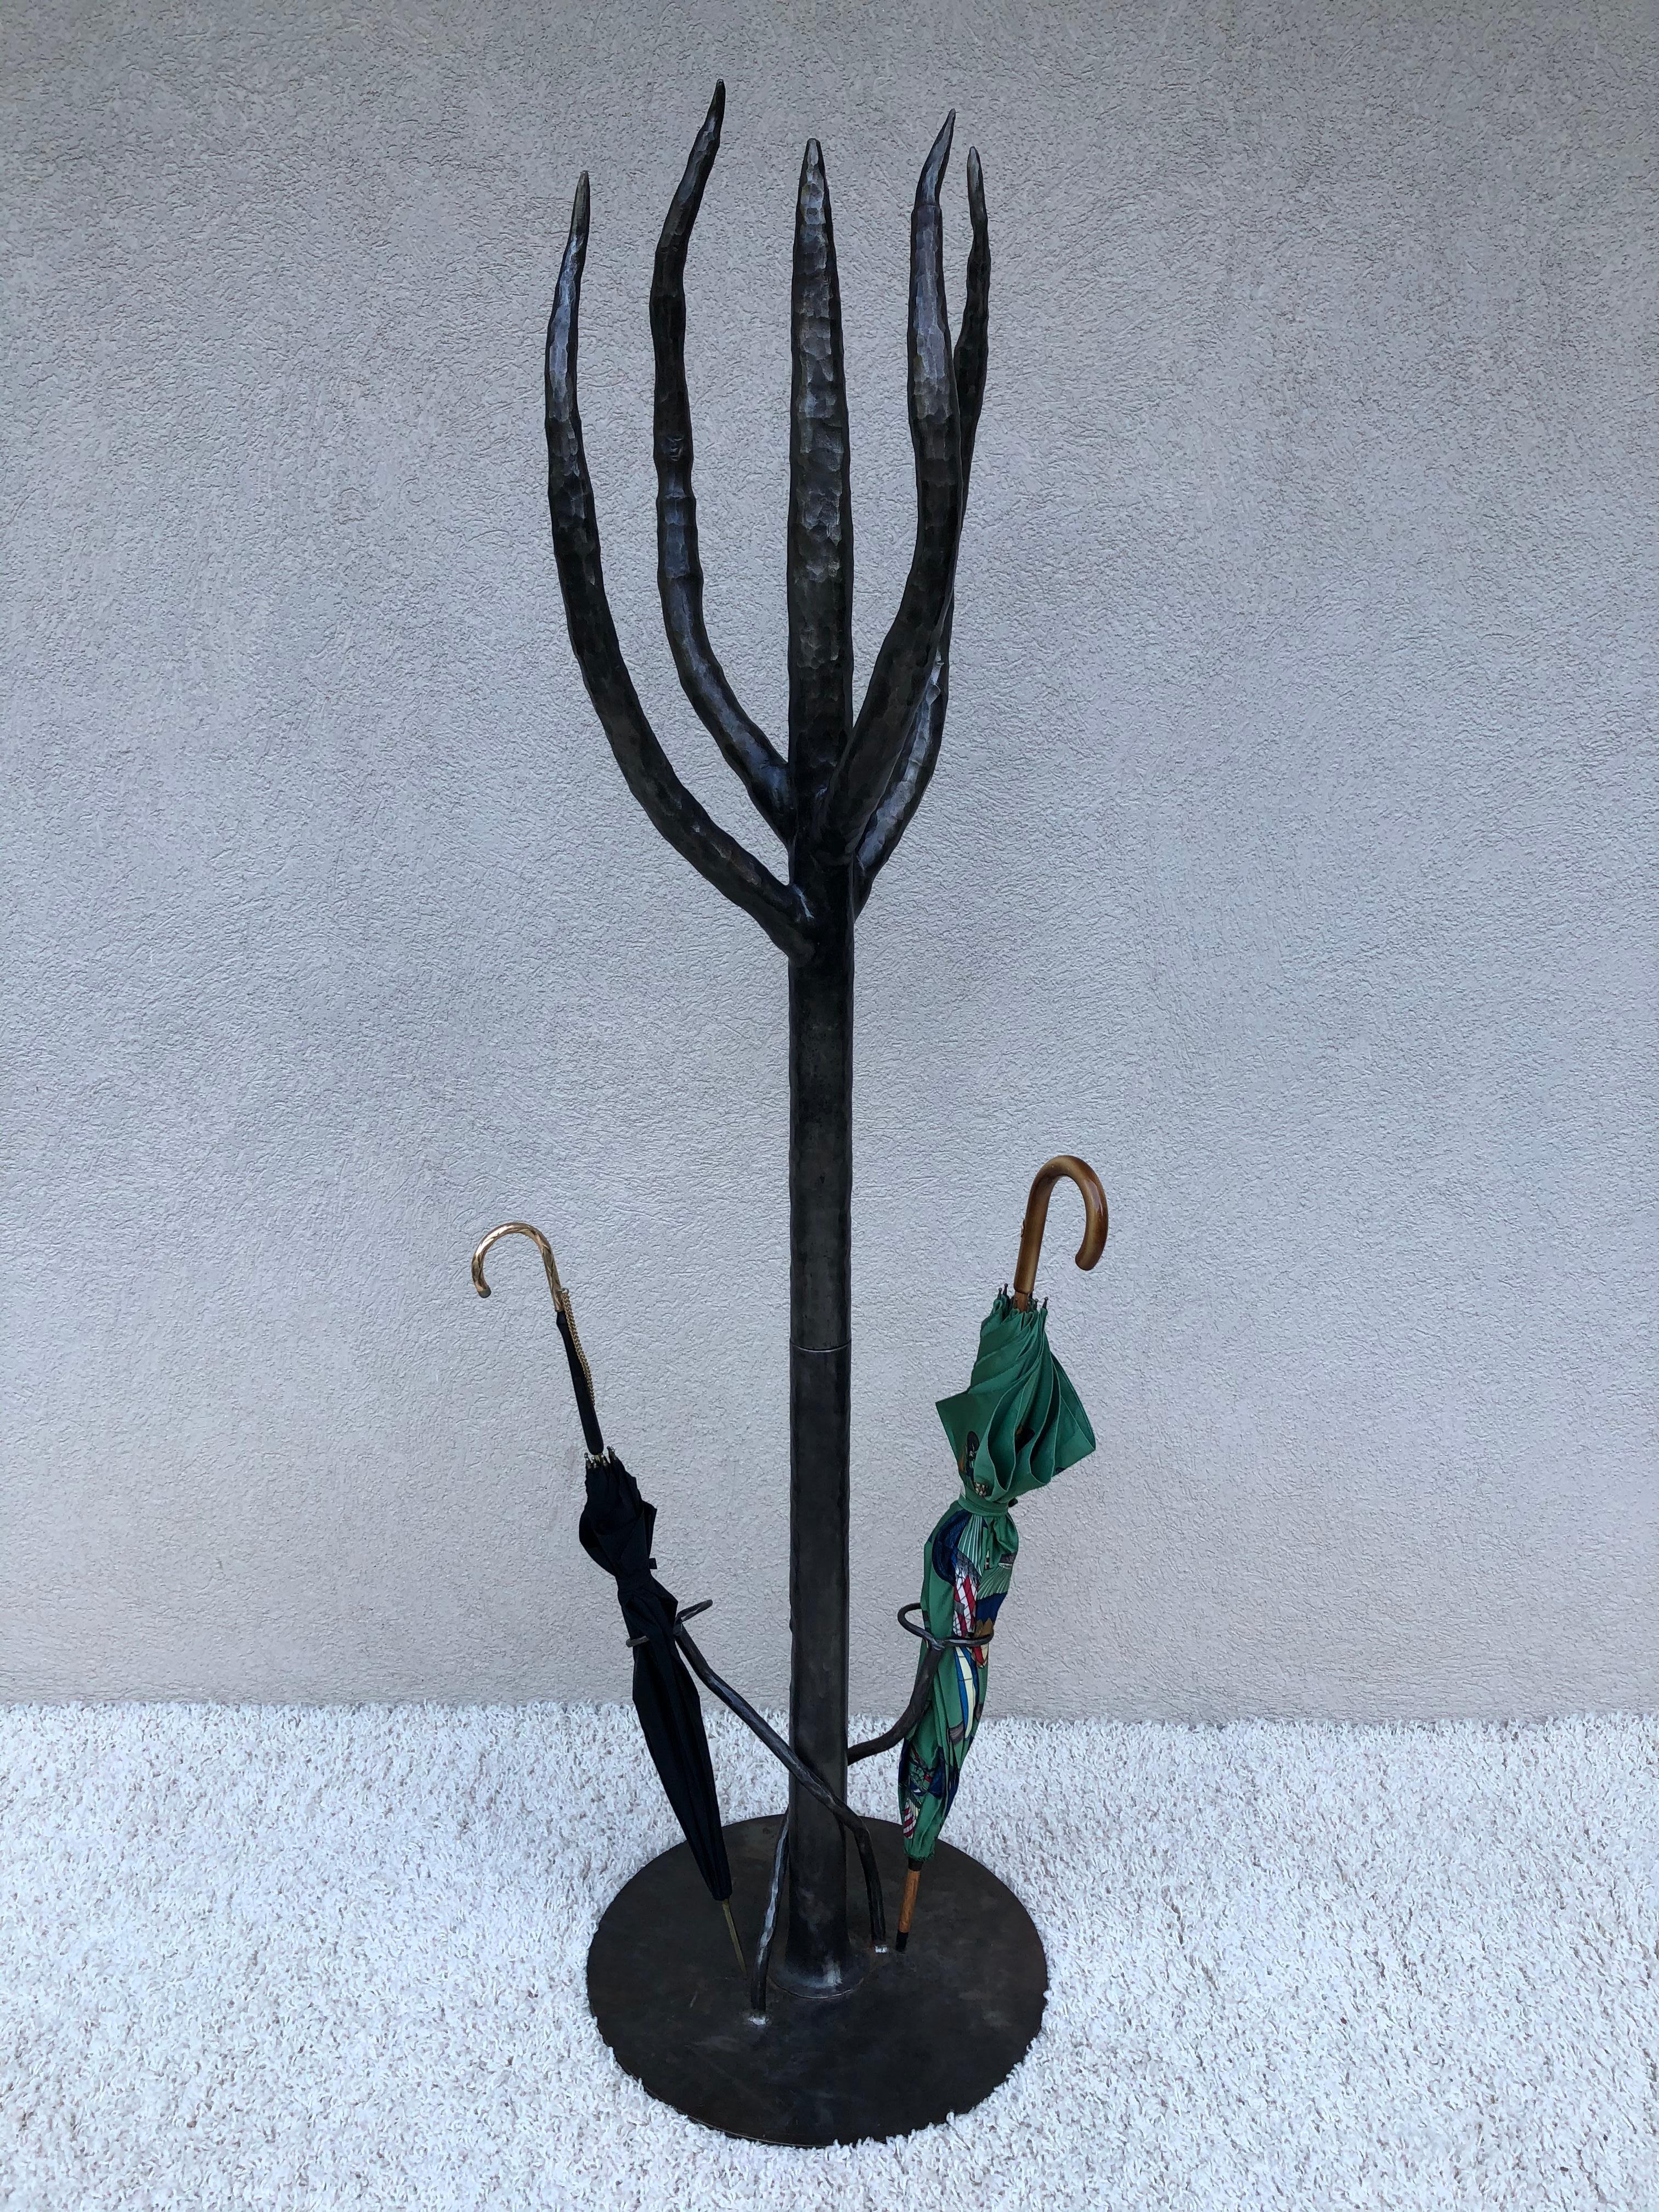 American Handwrought Cactus Coat Hall Tree /Umbrella Stand Entrance Sculpture For Sale